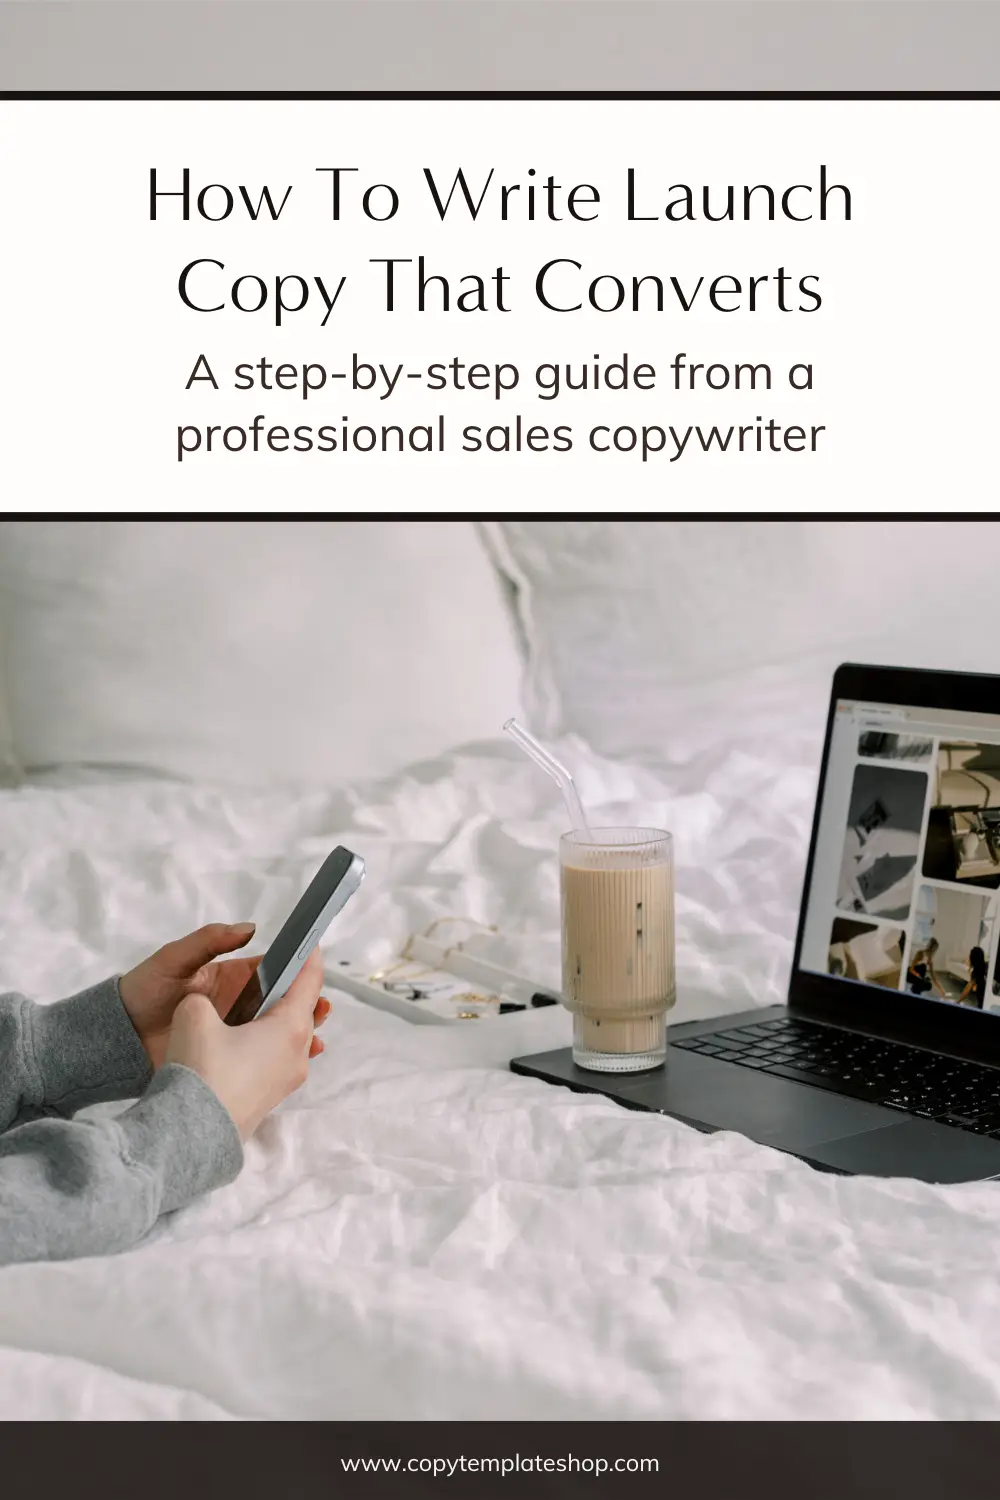 Writing Launch Copy That Converts A Step-by-Step Guide